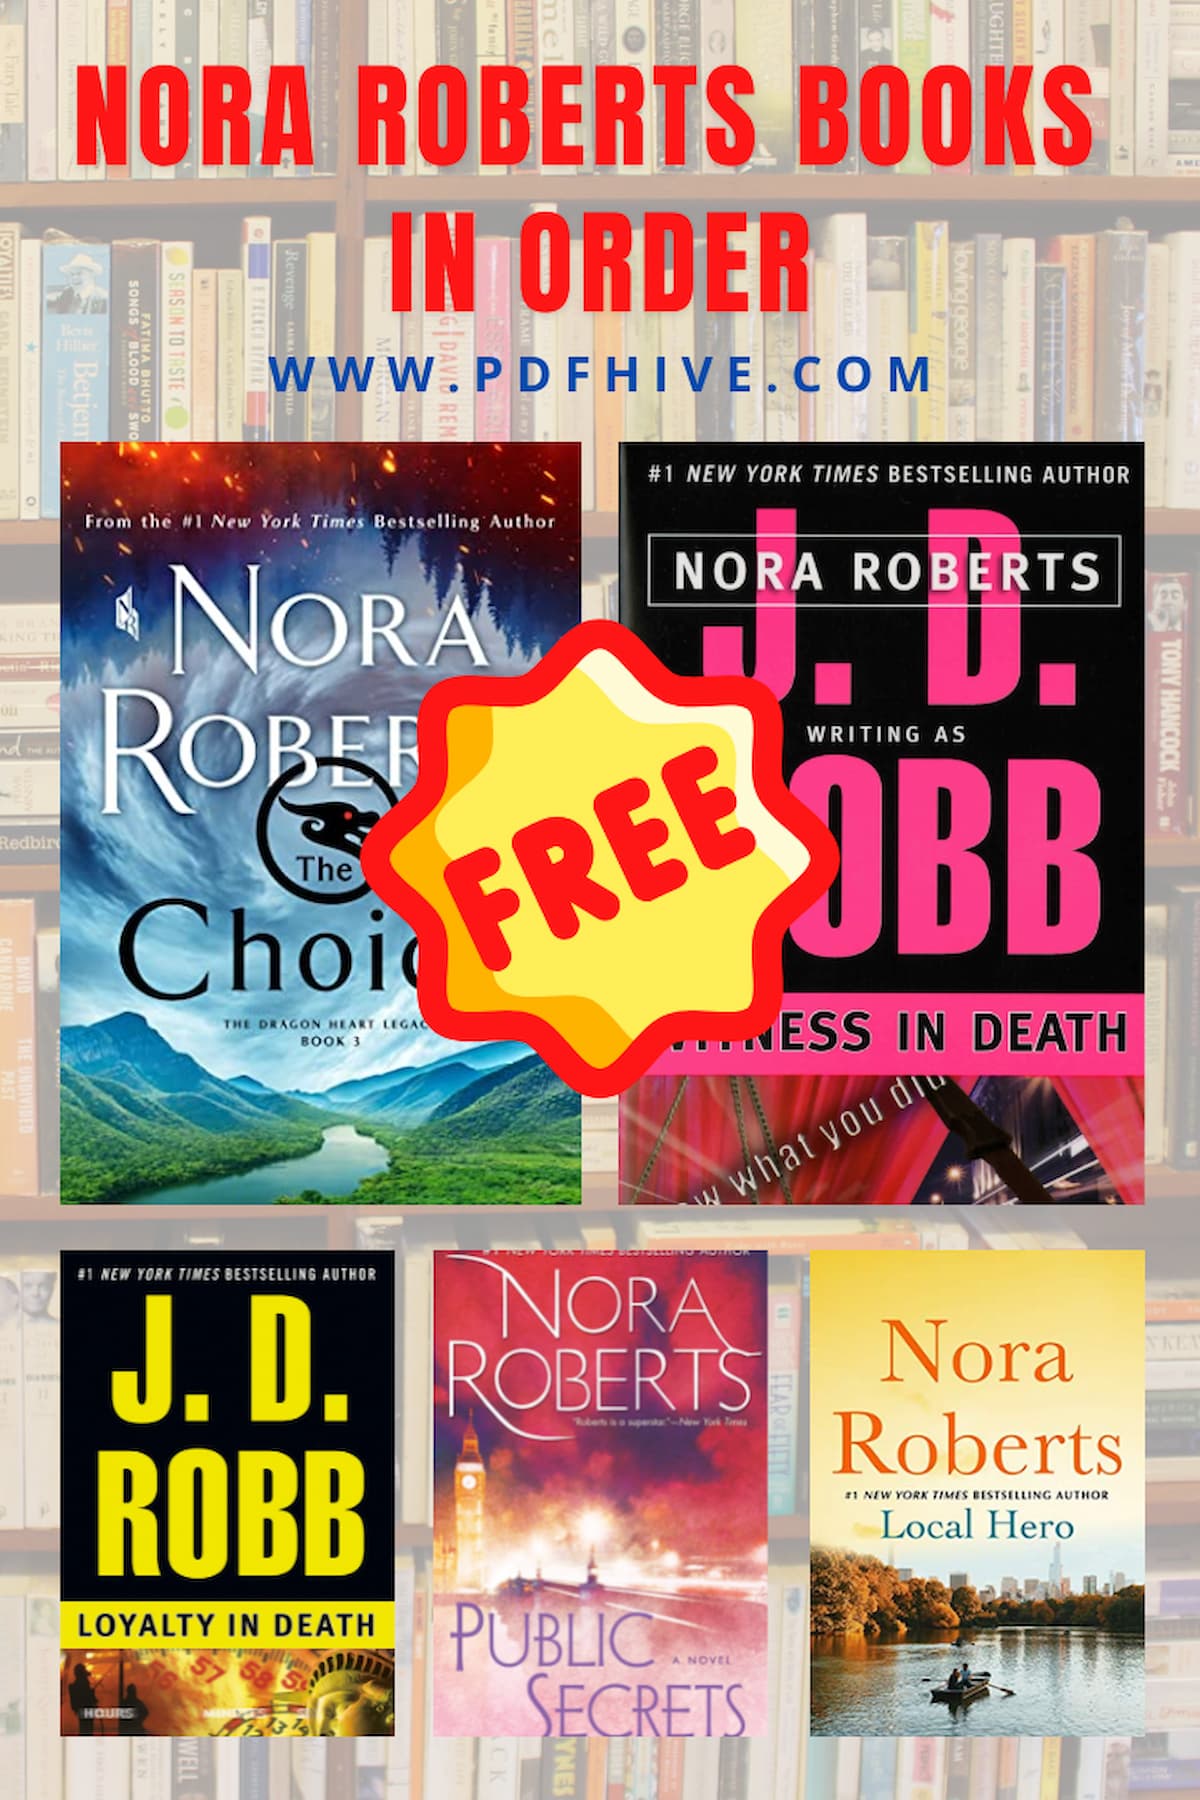 Bestsellers, Book Series, Book Series In Order, Books In Order, Contemporary Romance, Nora Roberts Books In Order, Romantic Suspense, Thrillers, Women's Fiction